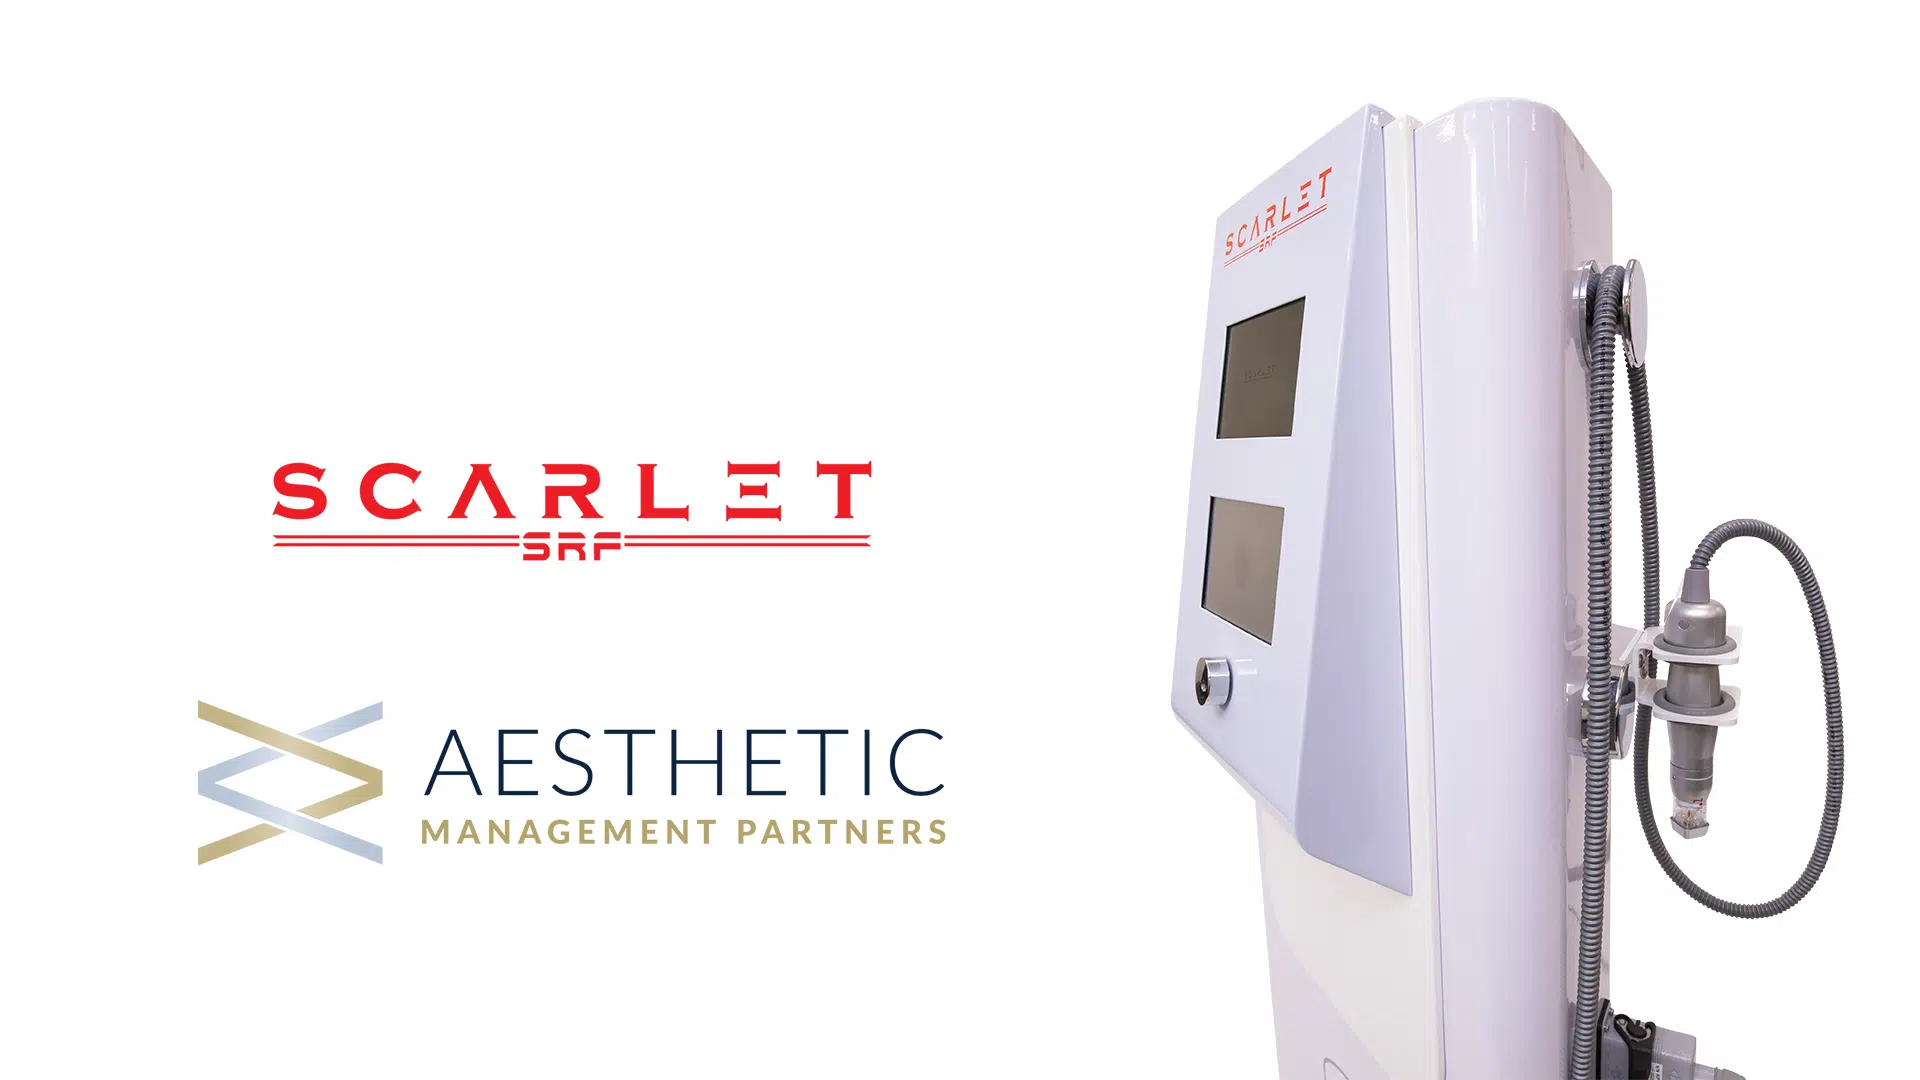 Untitled 5.png - Aesthetic Management Partners - Medical Aesthetics Equipment For The Modern Practice